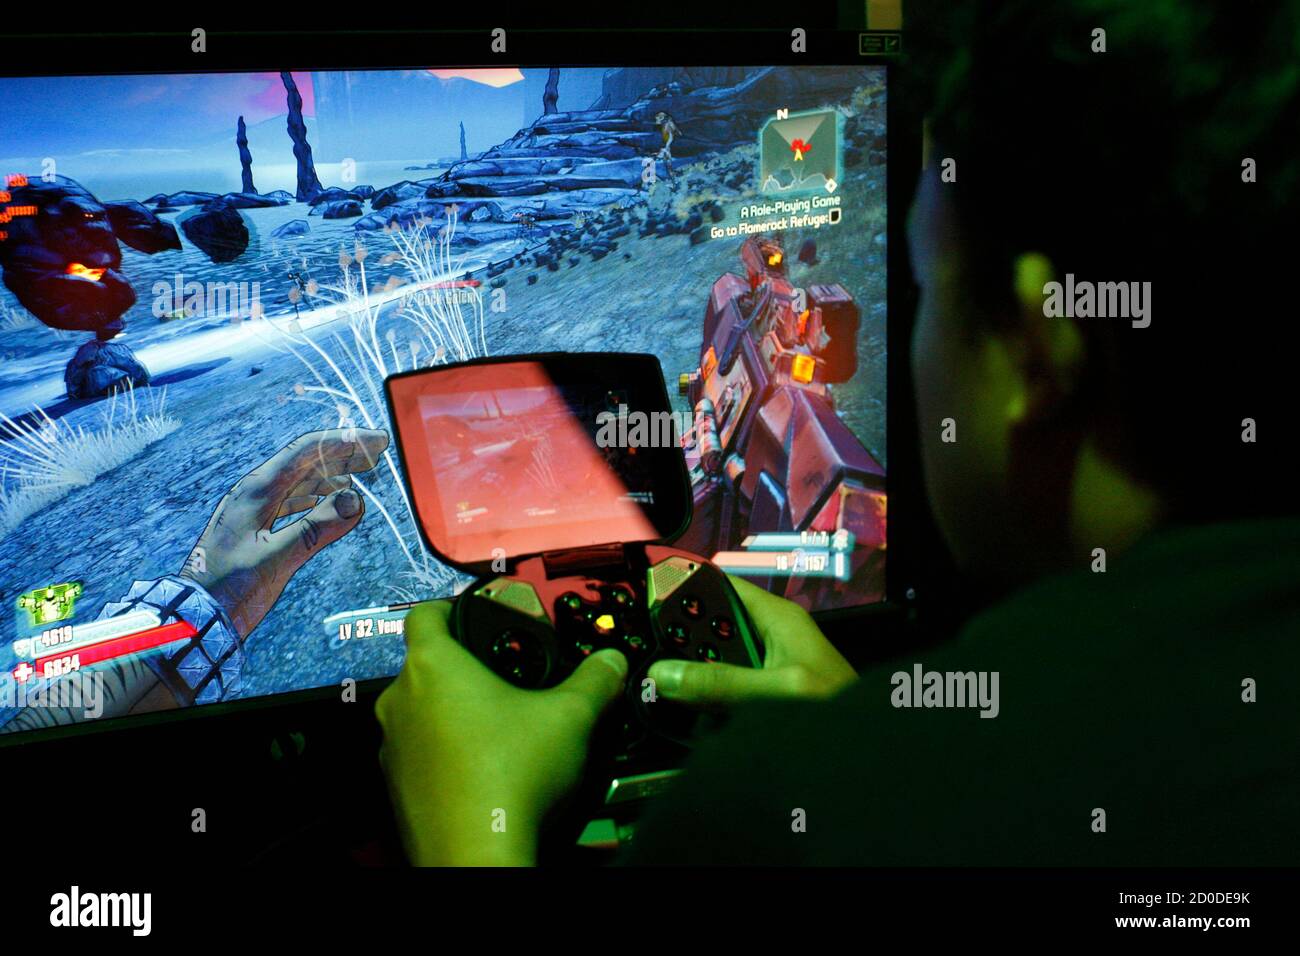 A man tries a game at the Nvidia Shield PC Game Streaming exhibit at E3, the Electronic Entertainment Expo, in Los Angeles, California, June 11, 2013.    REUTERS/David McNew (UNITED STATES - Tags: SCIENCE TECHNOLOGY SOCIETY BUSINESS) Stock Photo